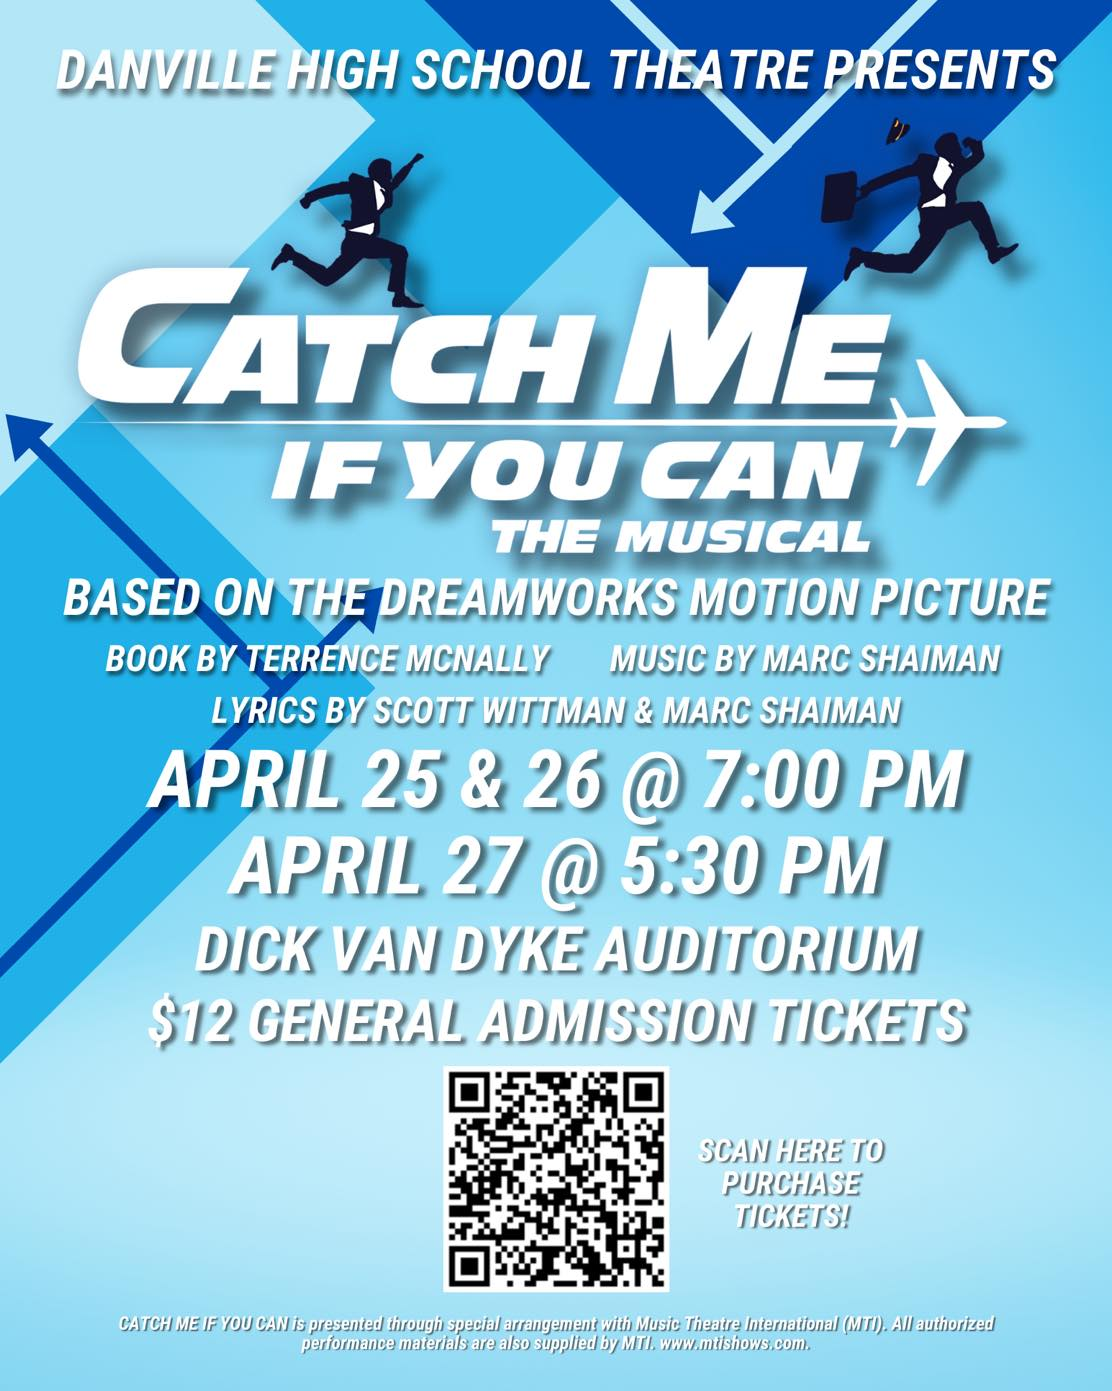 The Community Connection April 25th - DHS Theatre 'Catch Me If You Can, The Musical'